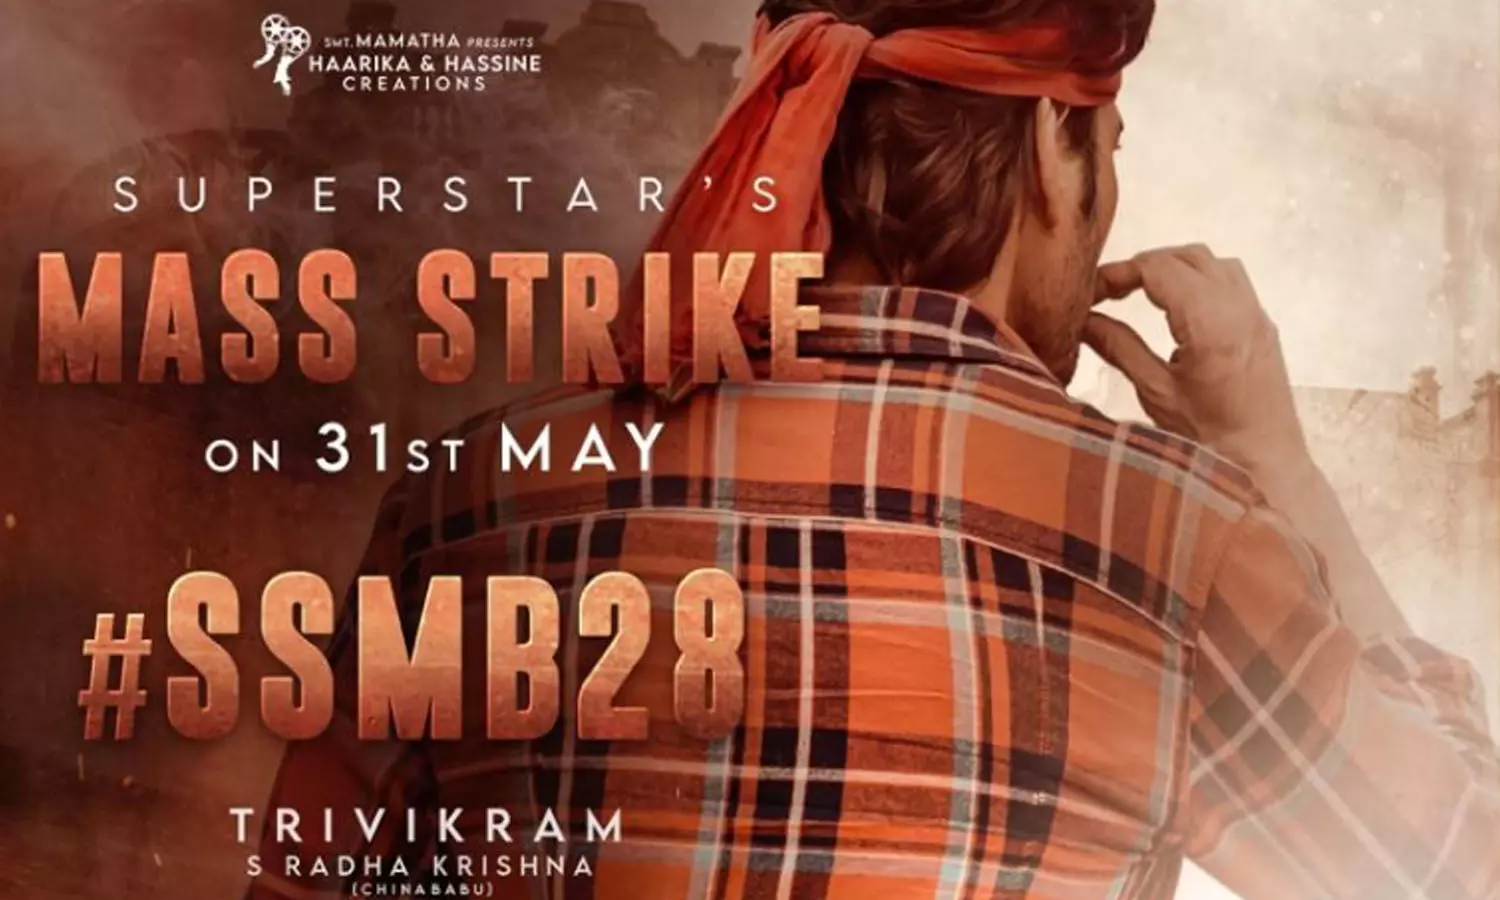 Superstar Mahesh Babu to offer a Mass Strike for the fans on May 31